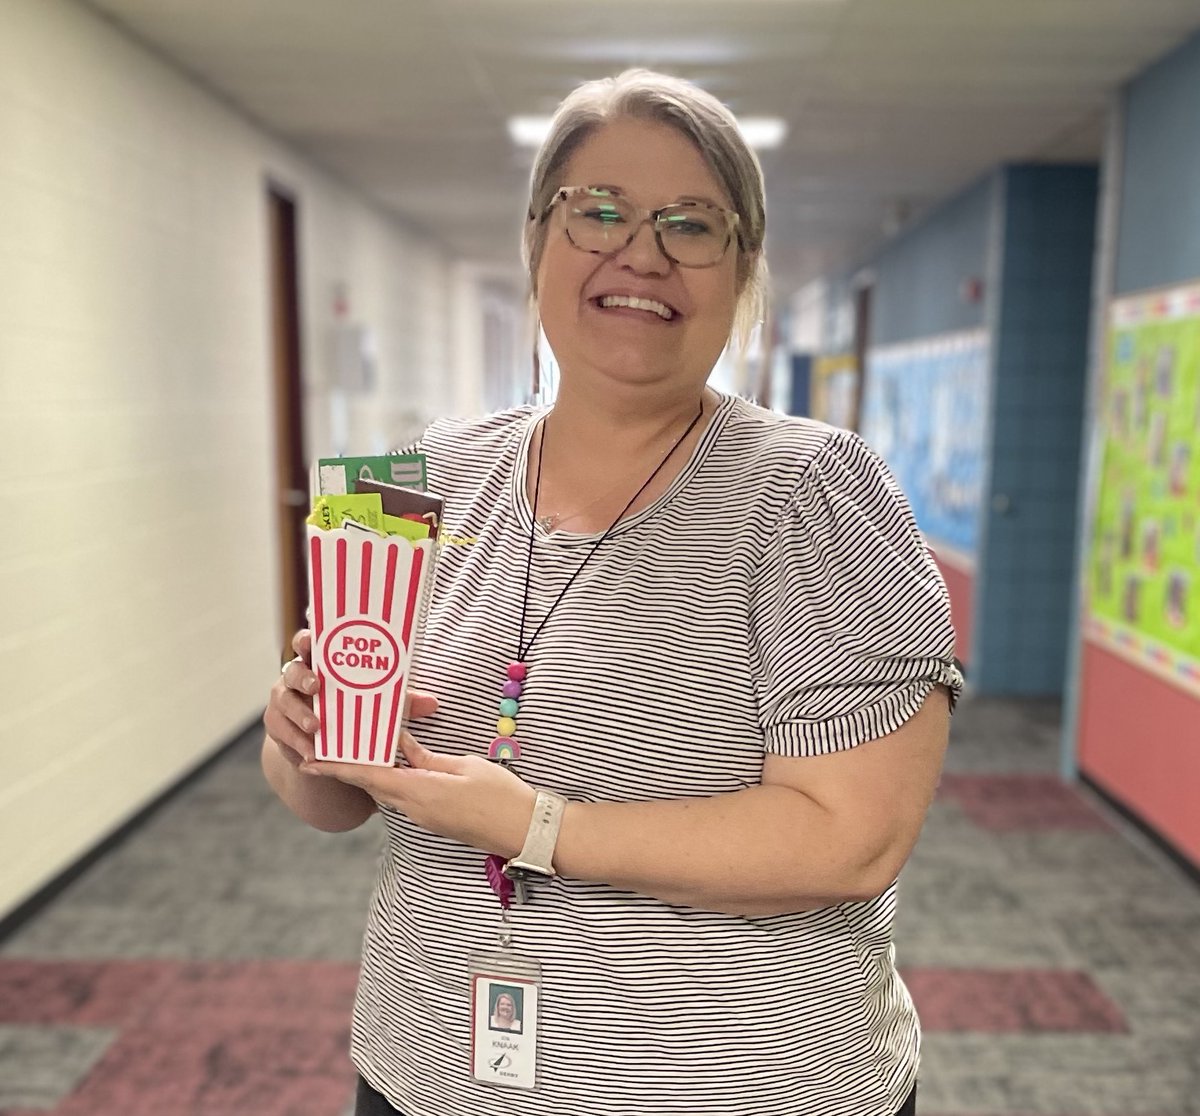 Thank you Derby Plaza Theaters for donating movie passes to help appreciate a few dedicated educators! Laura McFarren @DNMSFalcons, Gary Meitler @DHS_Panthers, & Jen Knaak from Derby Parents As Teachers were recognized for sharing good news & positive activities. #DerbyProud